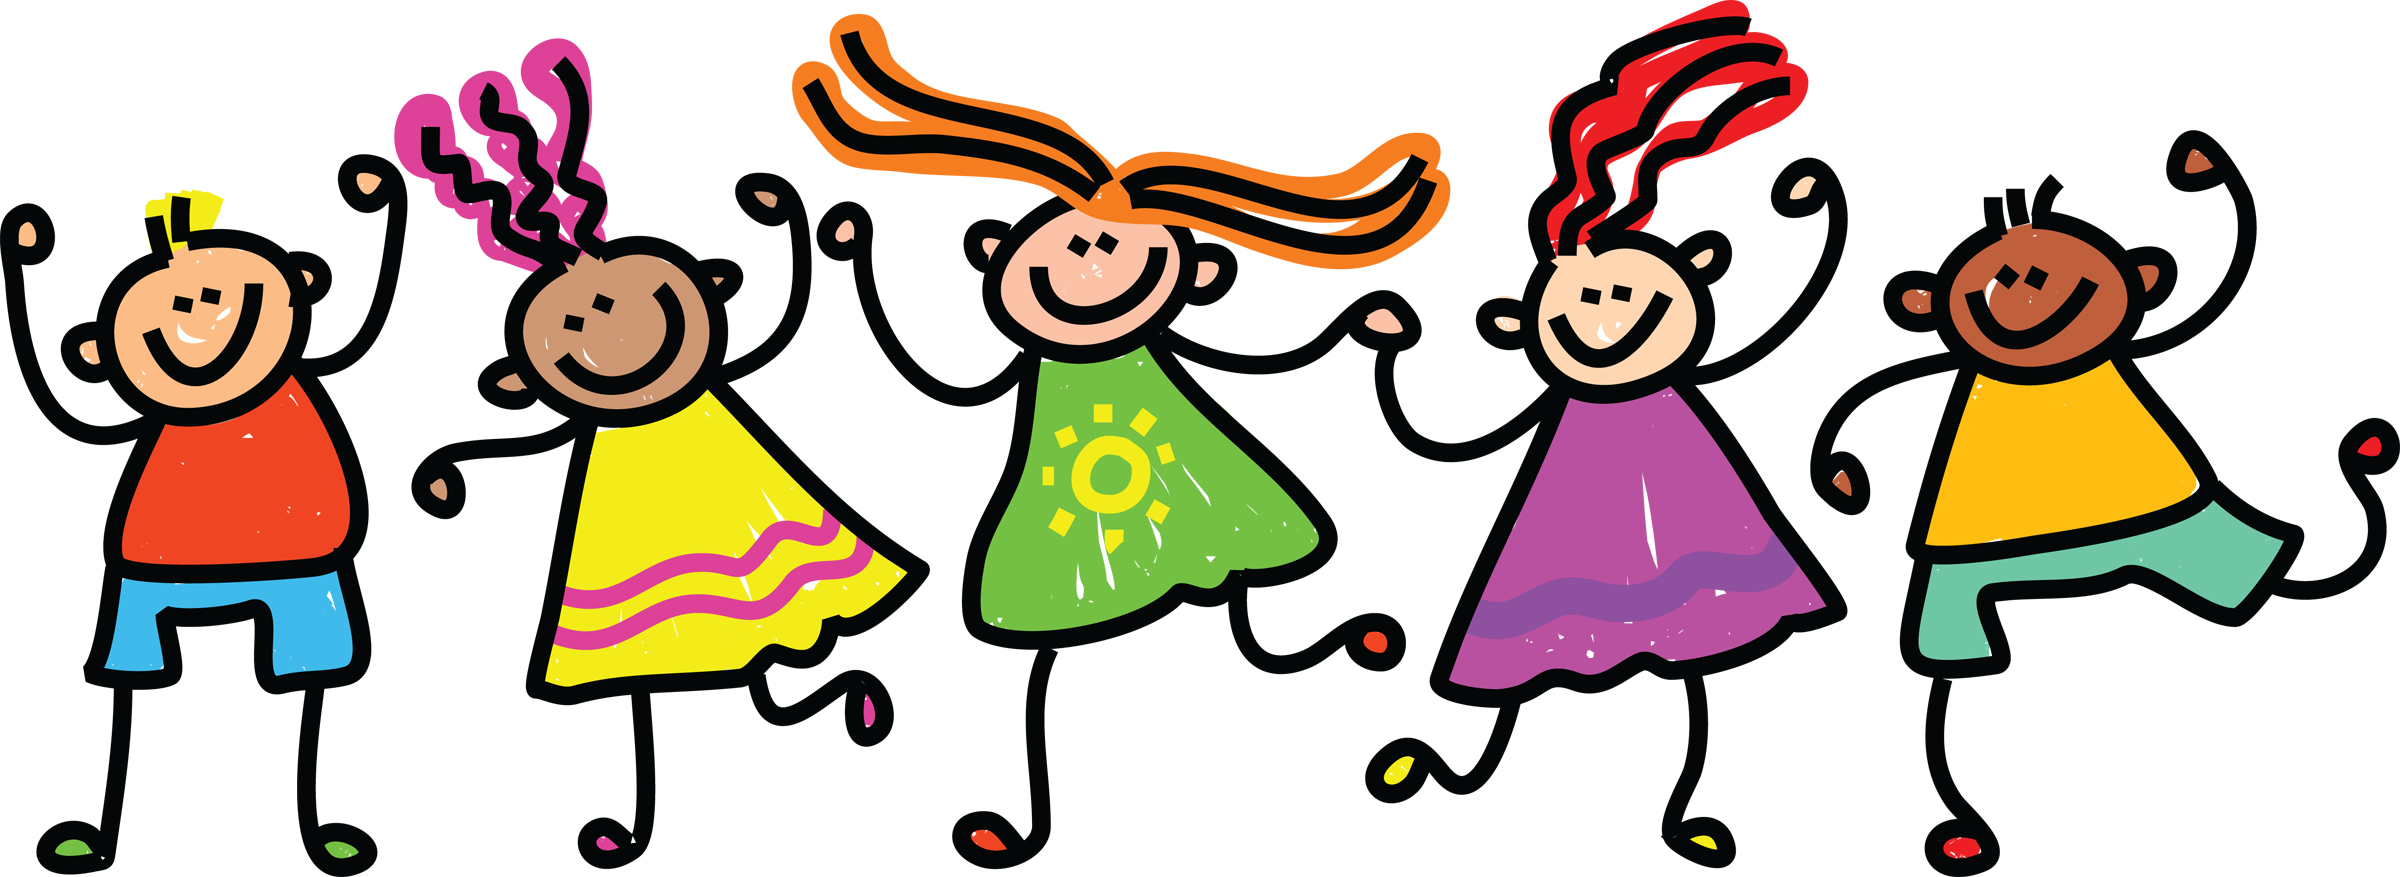 Excited kids clipart free cli - Free Kids Clip Art